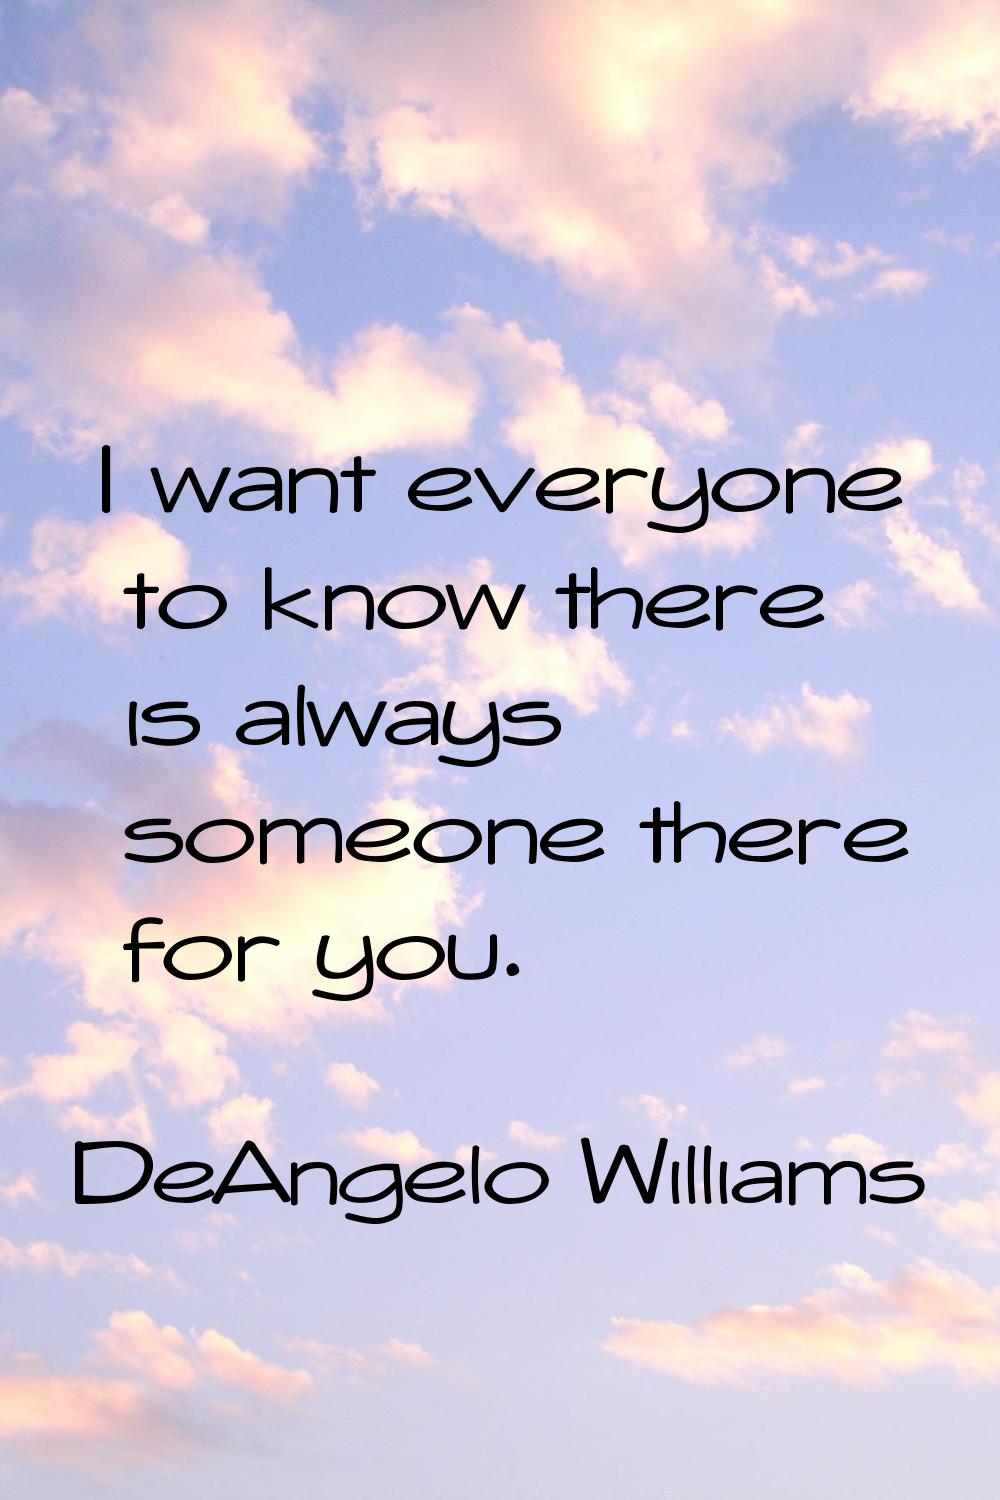 I want everyone to know there is always someone there for you.